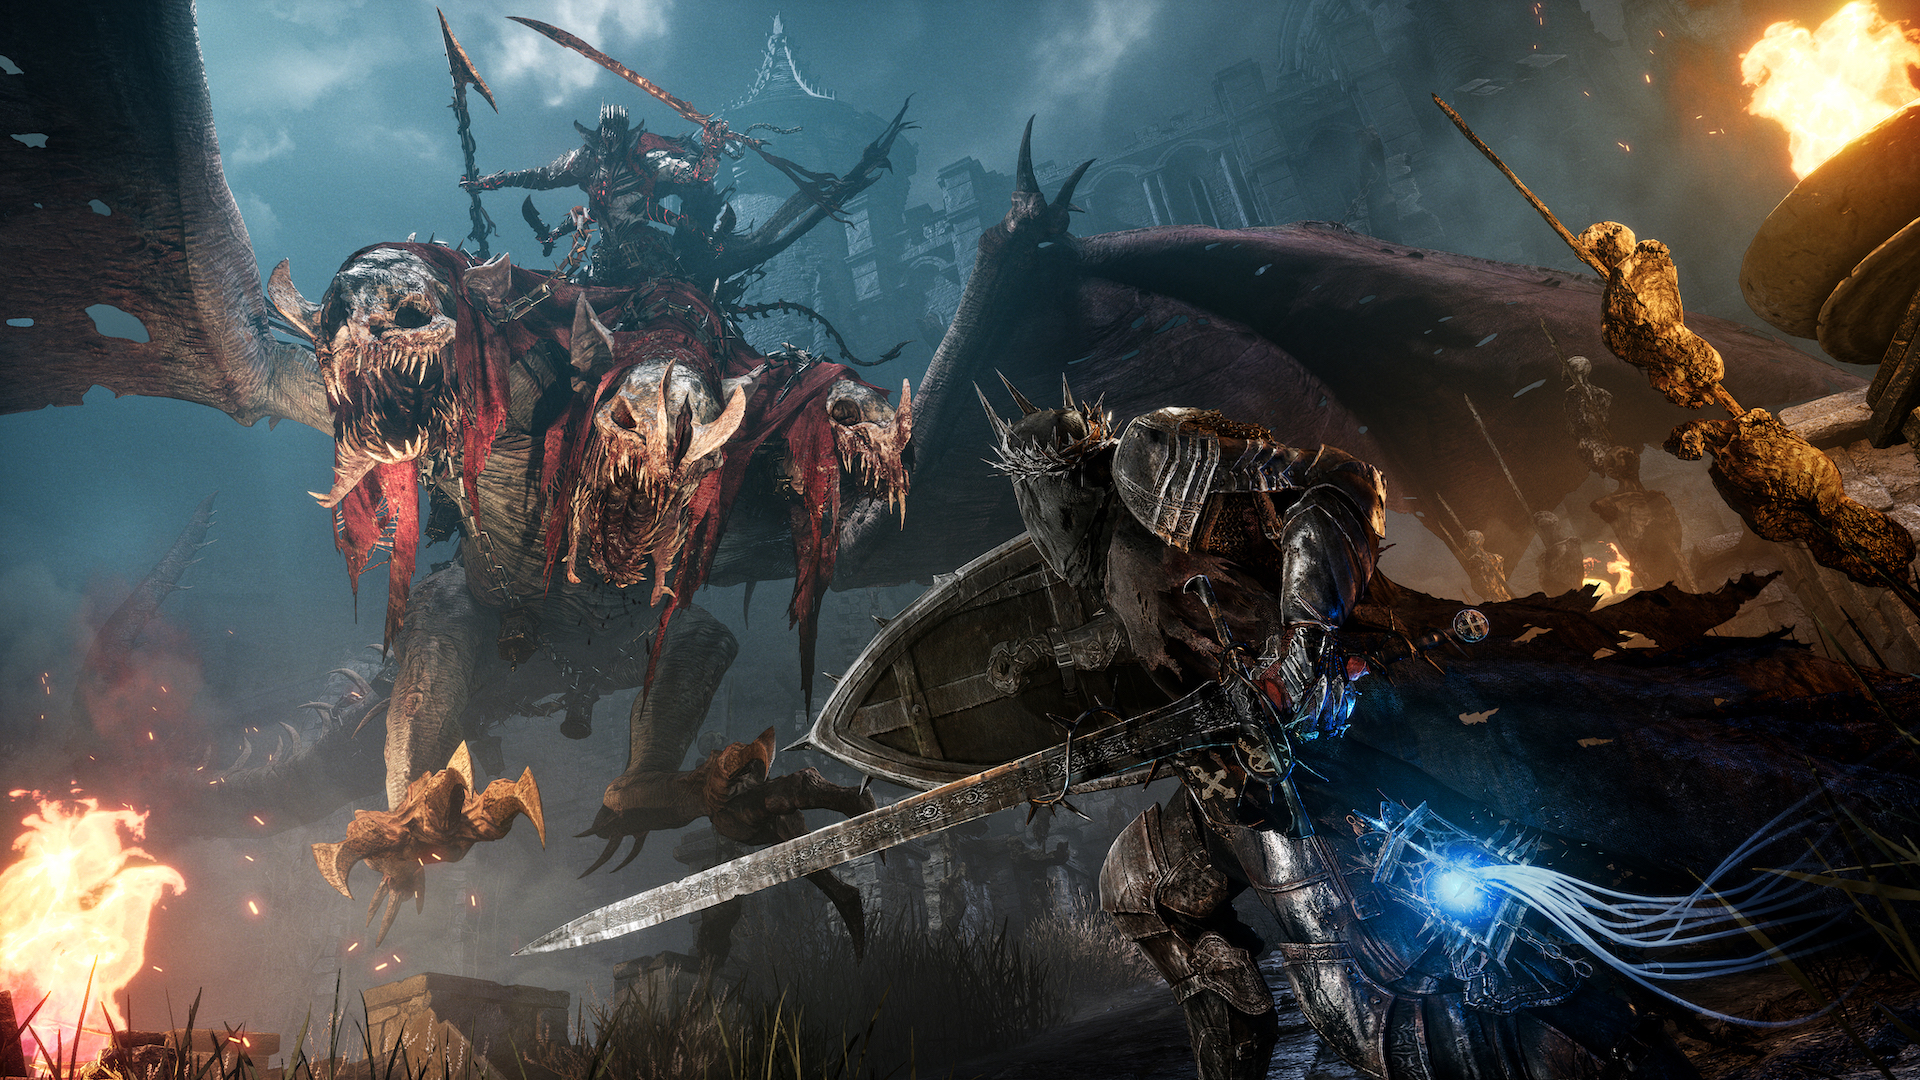 Lords of the Fallen (2023) sticks very close to the Dark Souls